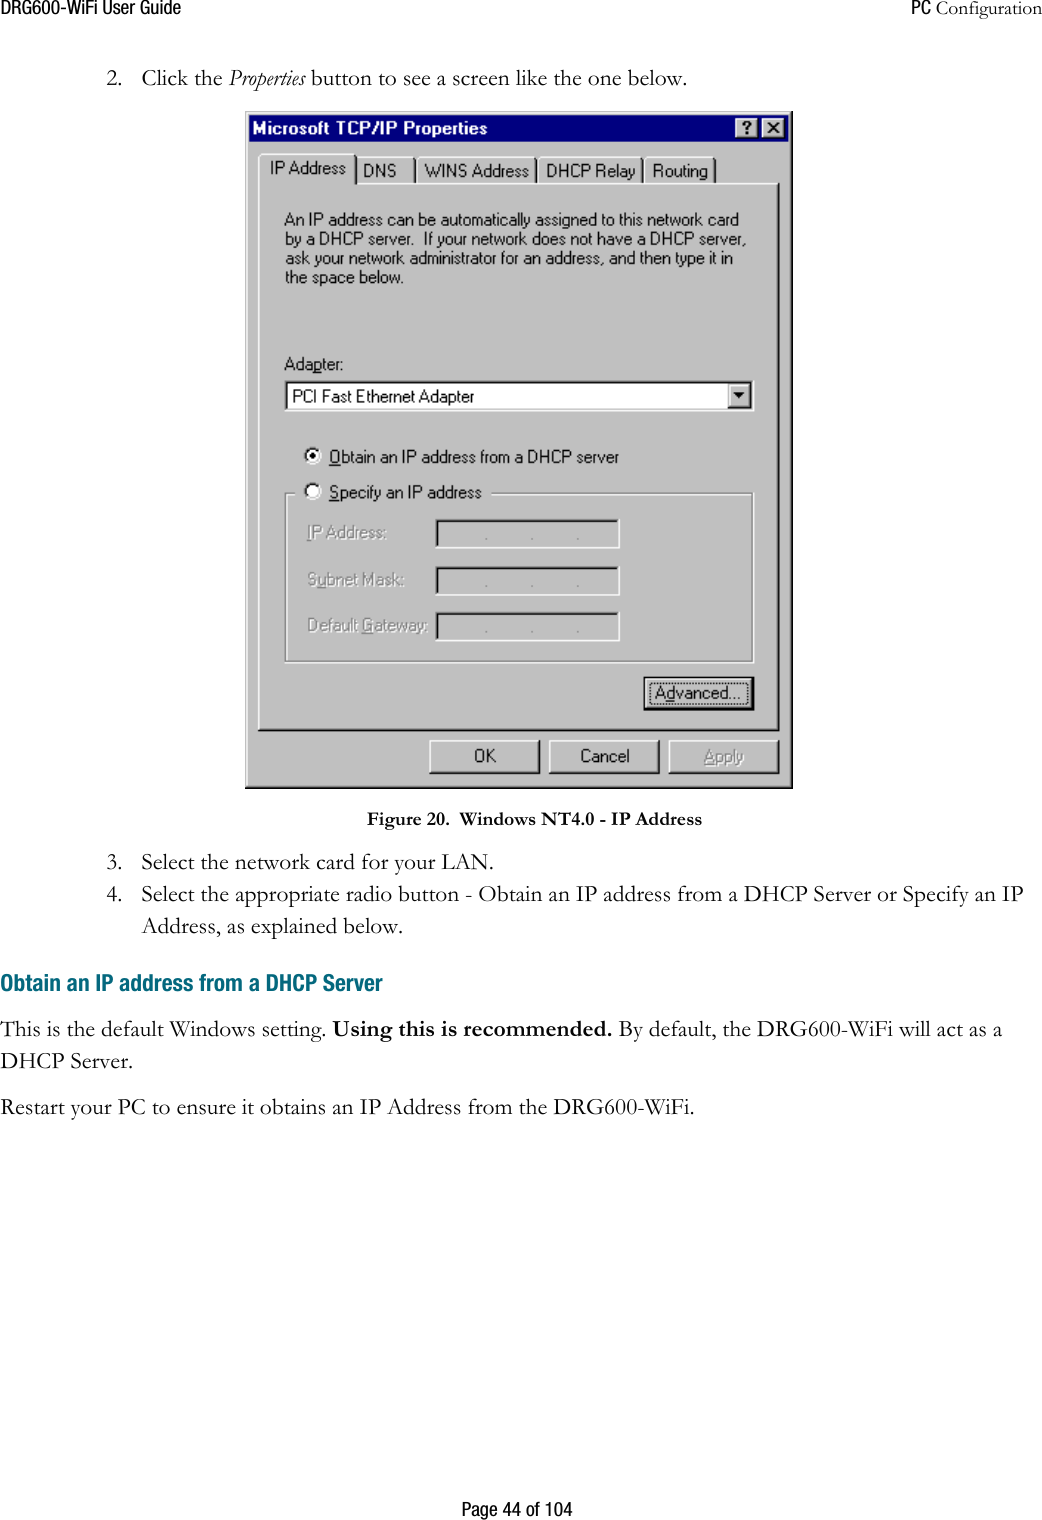 DRG600WiFi User Guide  PC Configuration  Page 44 of 104 2. Click the Properties button to see a screen like the one below.  Figure 20. Windows NT4.0 - IP Address 3. Select the network card for your LAN. 4. Select the appropriate radio button - Obtain an IP address from a DHCP Server or Specify an IP Address, as explained below. Obtain an IP address from a DHCP Server This is the default Windows setting. Using this is recommended. By default, the DRG600-WiFi will act as a DHCP Server. Restart your PC to ensure it obtains an IP Address from the DRG600-WiFi.    